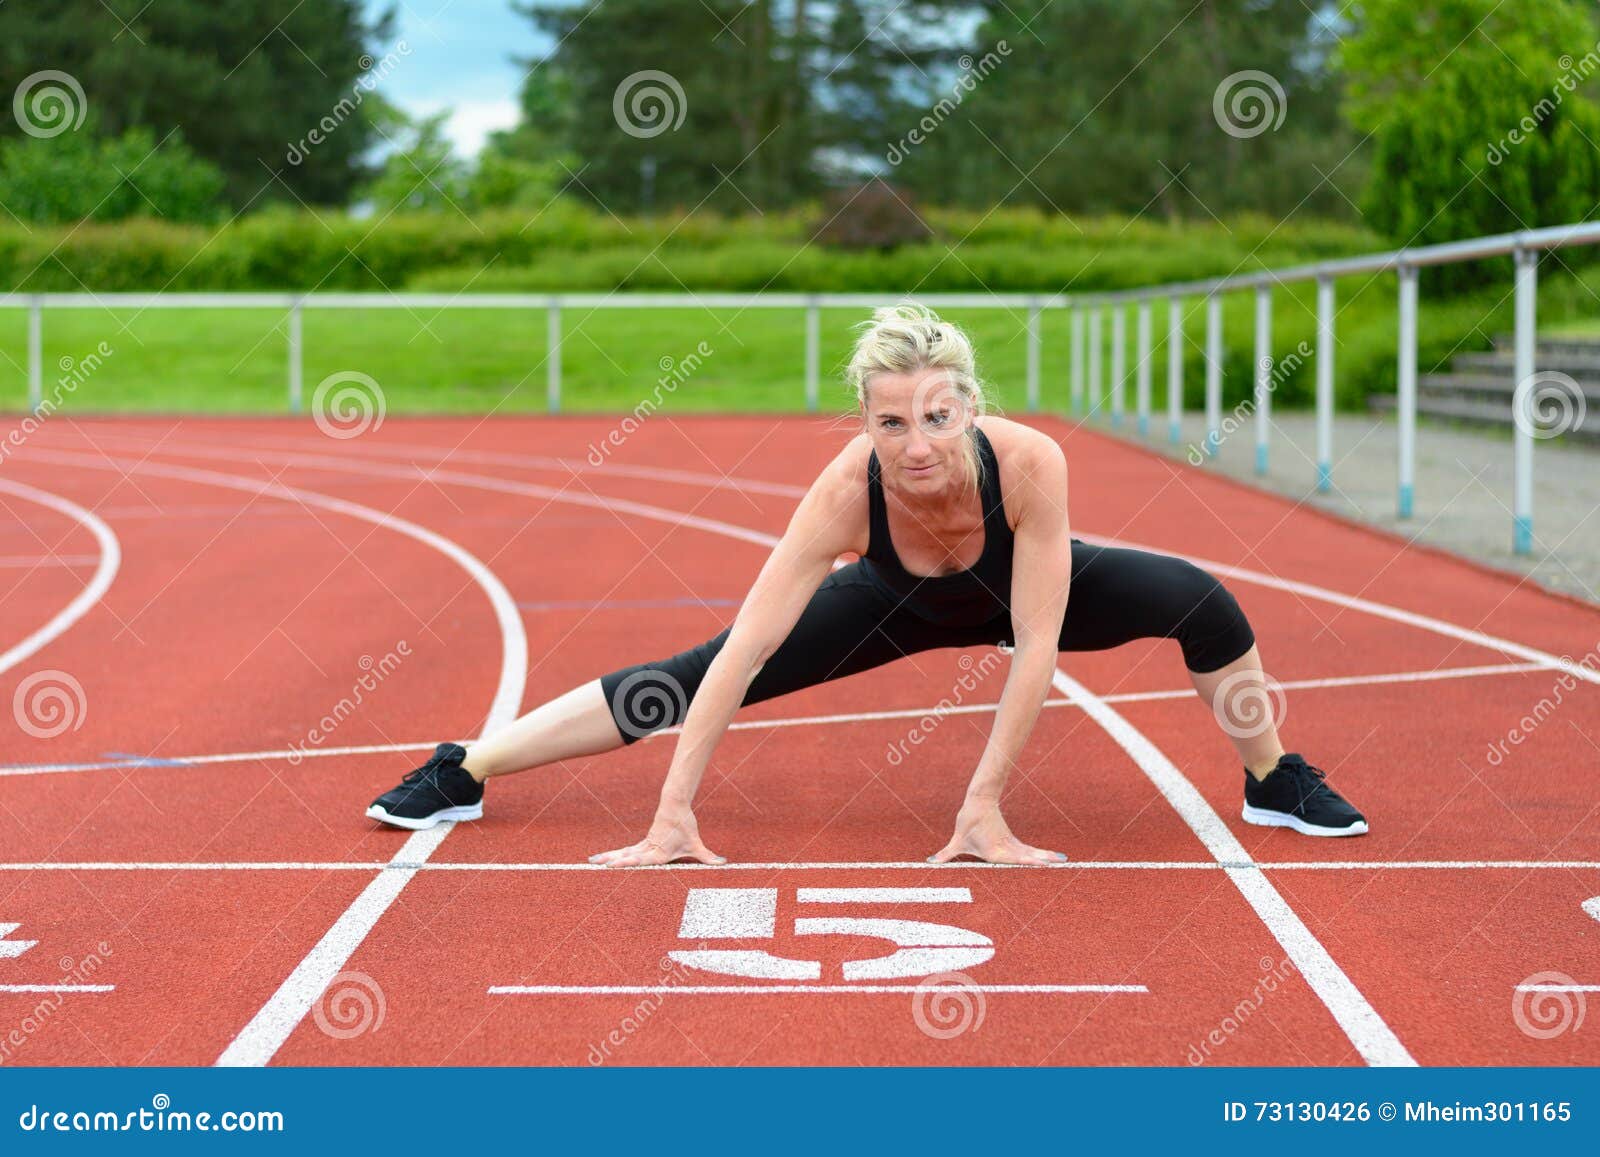 athletic woman doing straddle stretches on track